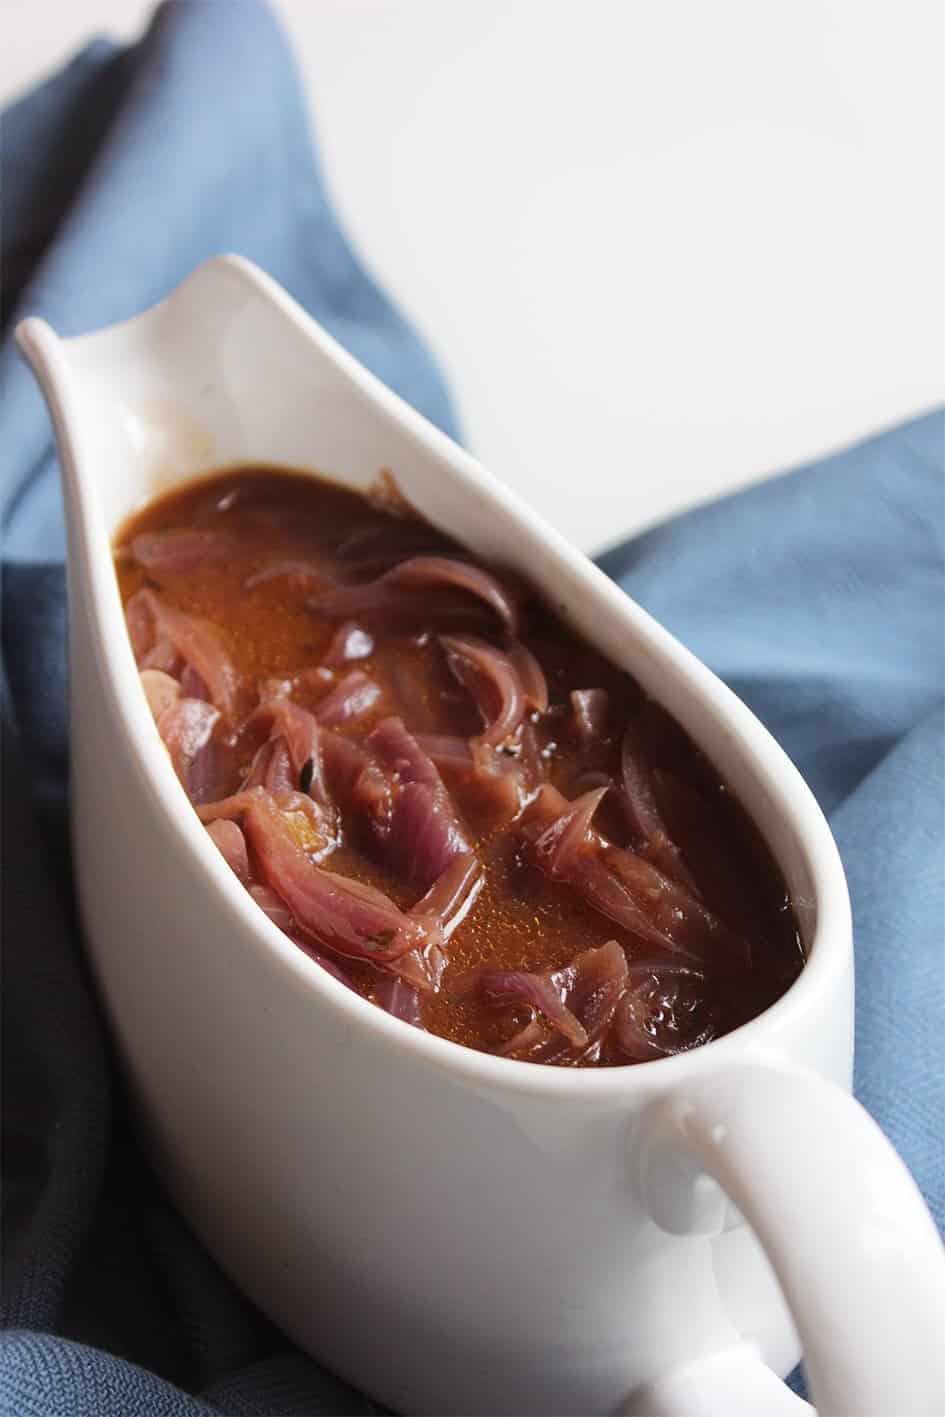 This onion gravy is a perfect accompaniment to bangers and mash, toad in the hole or a Sunday roast. Made from scratch and full of flavour. Vegetarian.